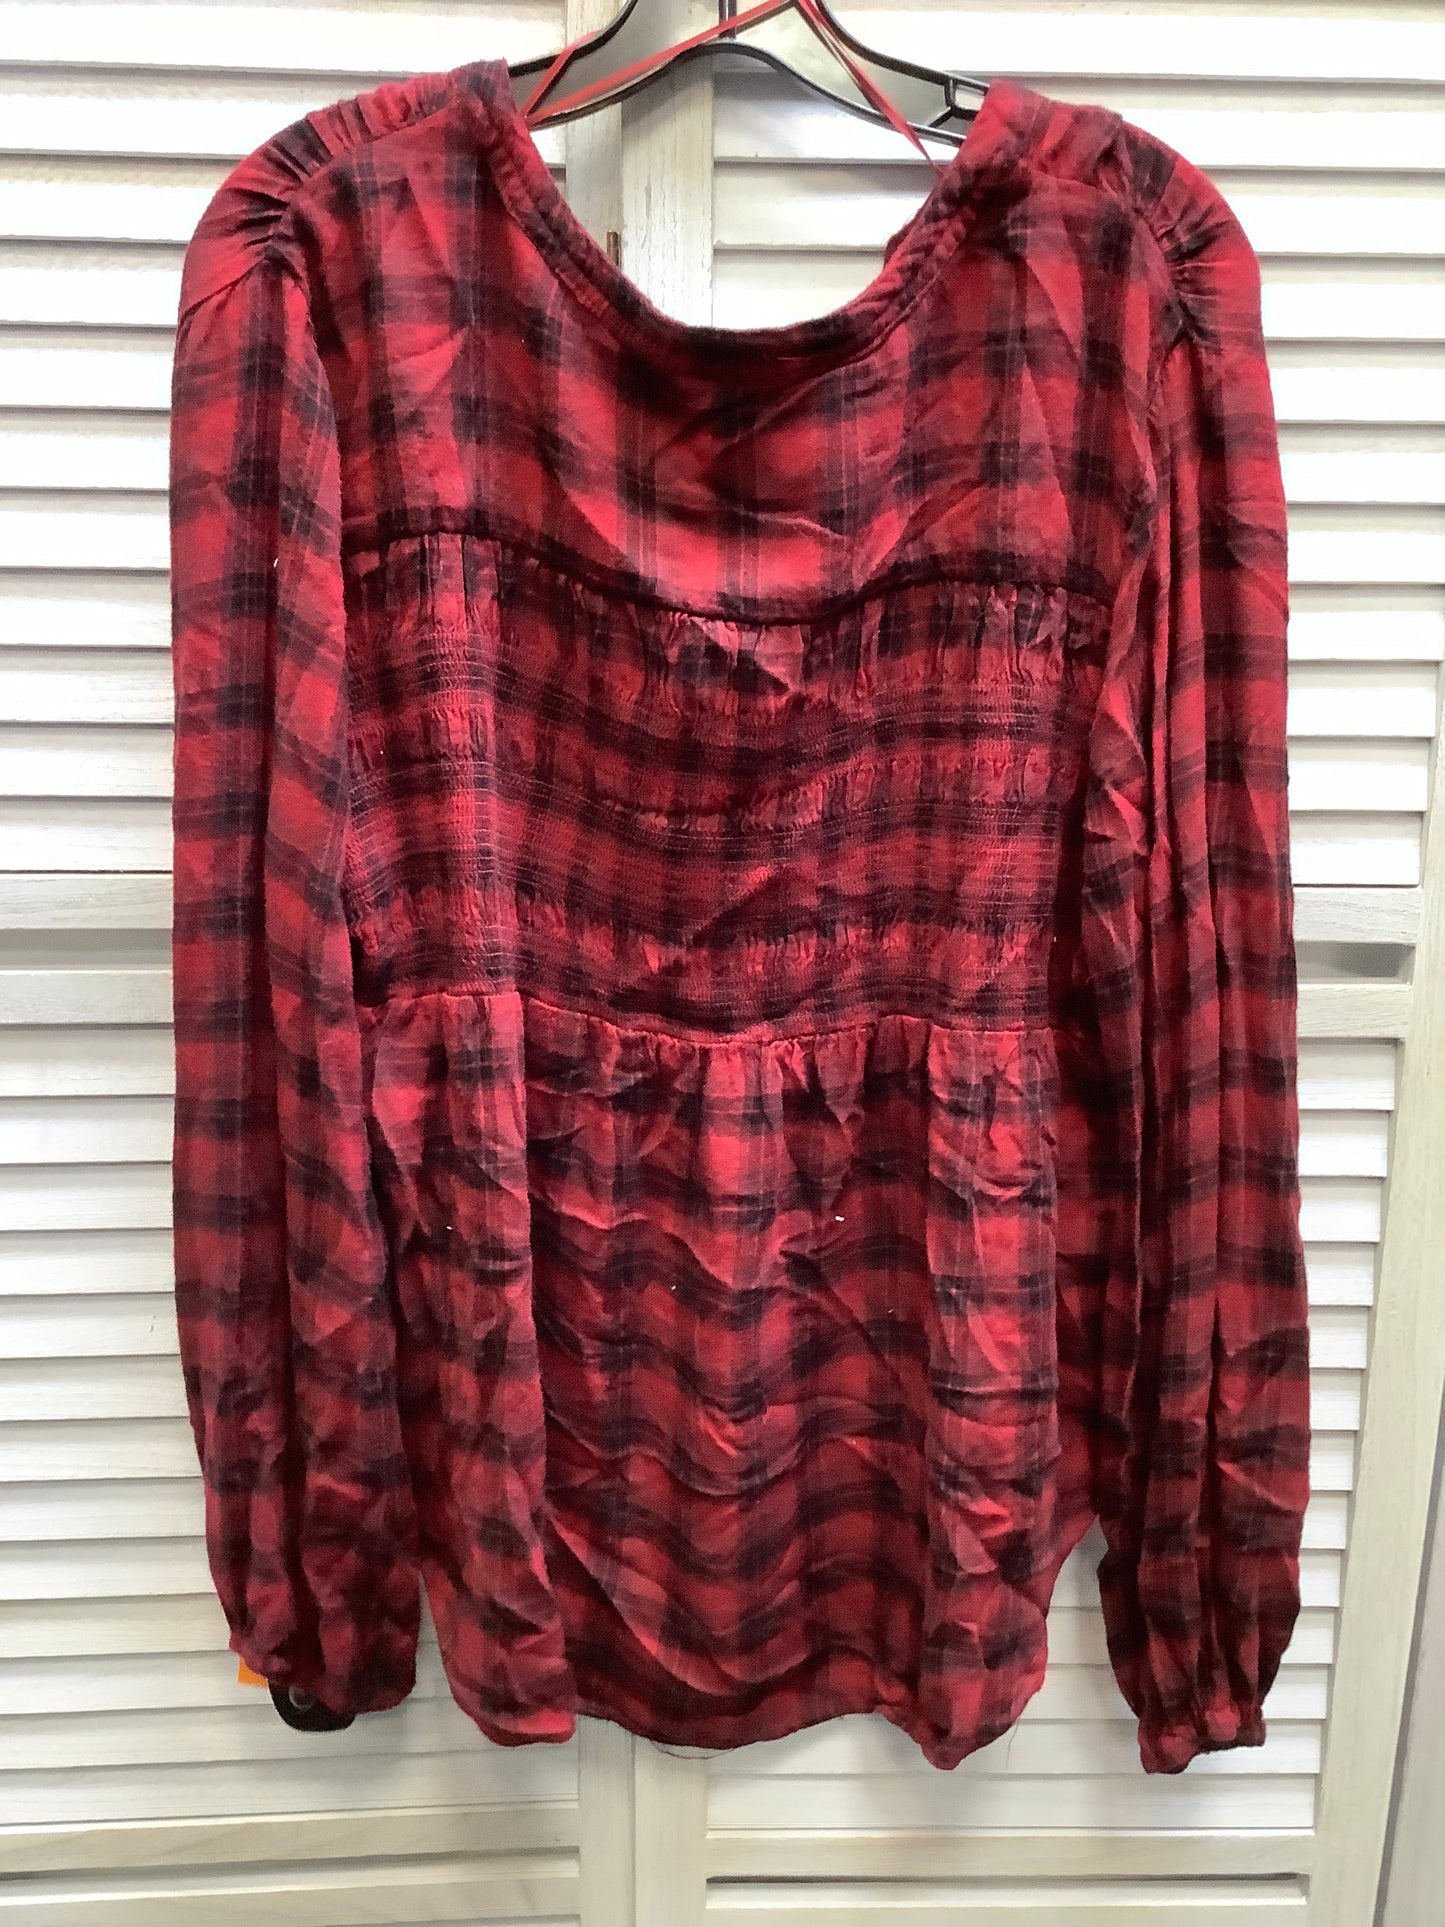 Red Black Top Long Sleeve Knox Rose, Size 2x